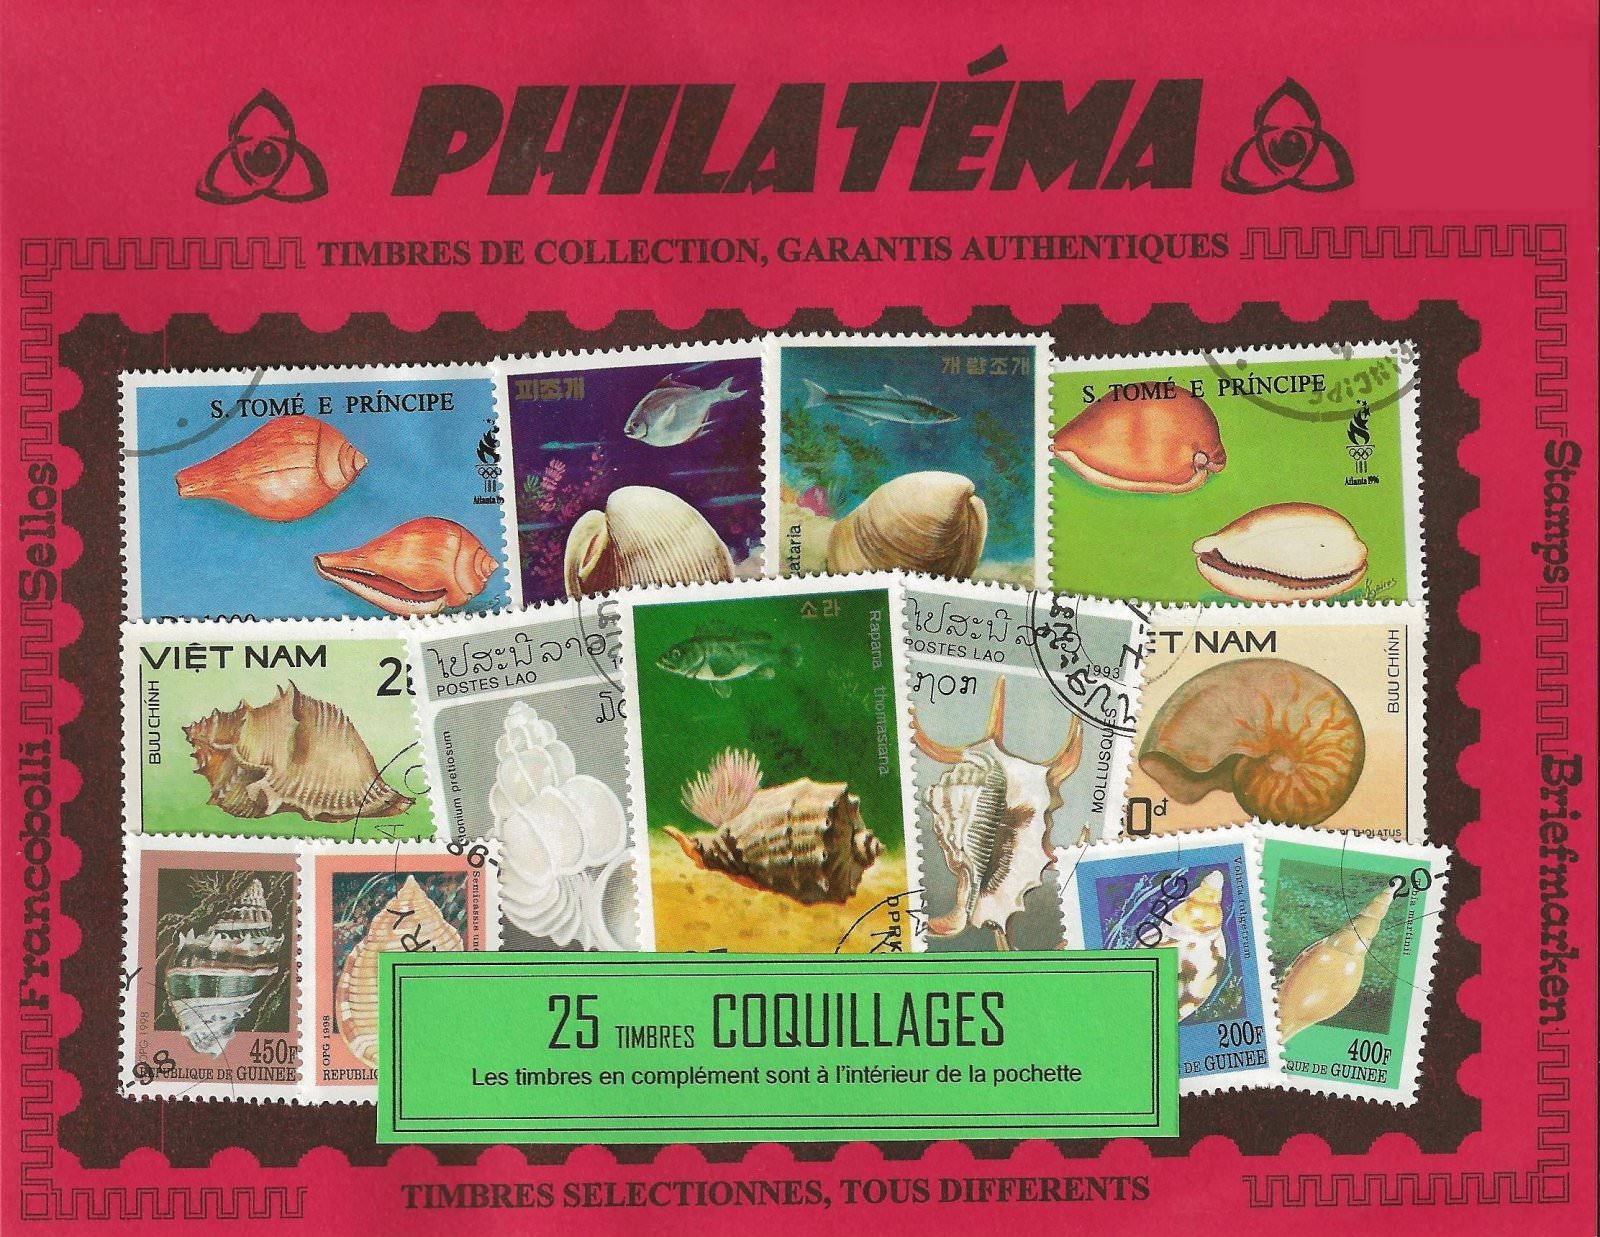 25 timbres coquillages